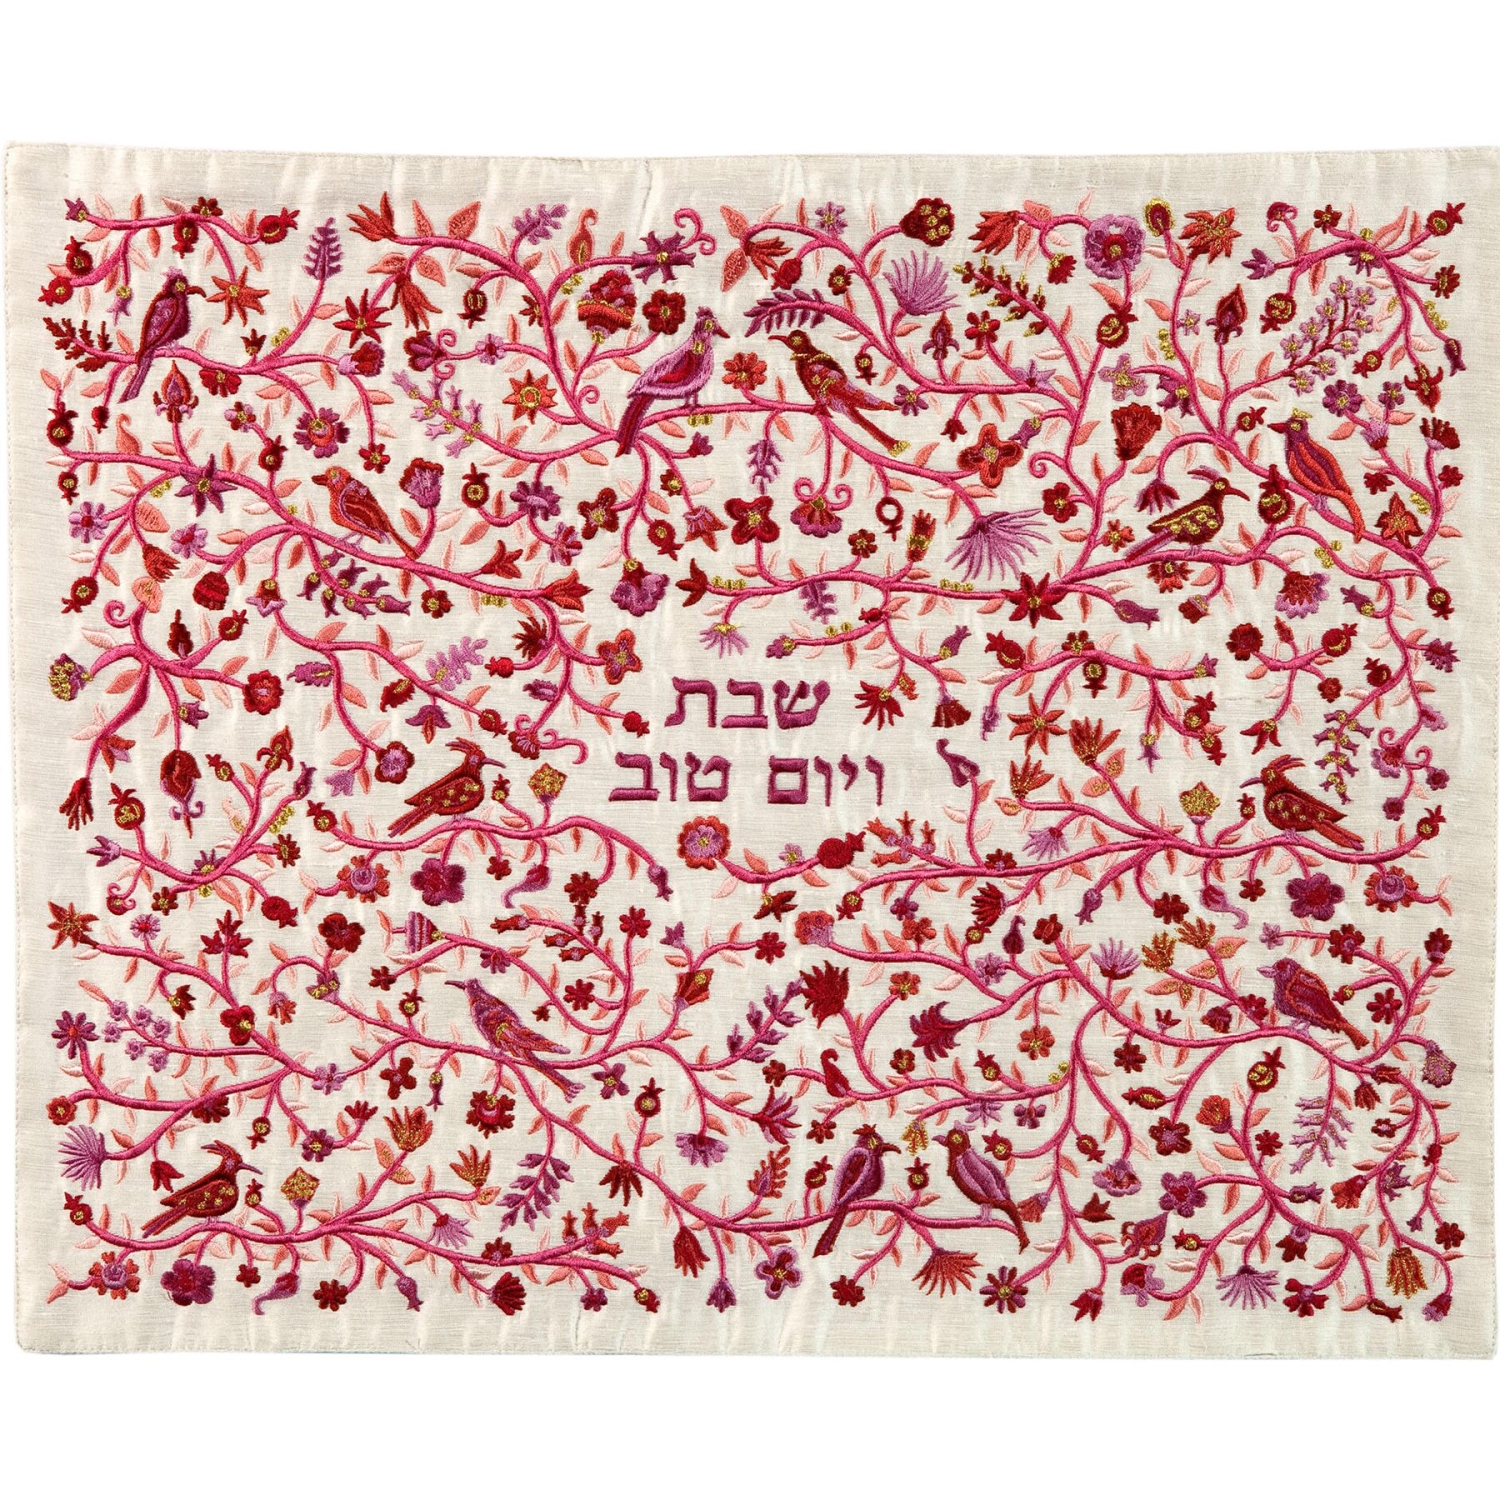 Yair Emanuel Embroidered Challah Cover - Flowers, Birds And Pomegranates (Red) - 1